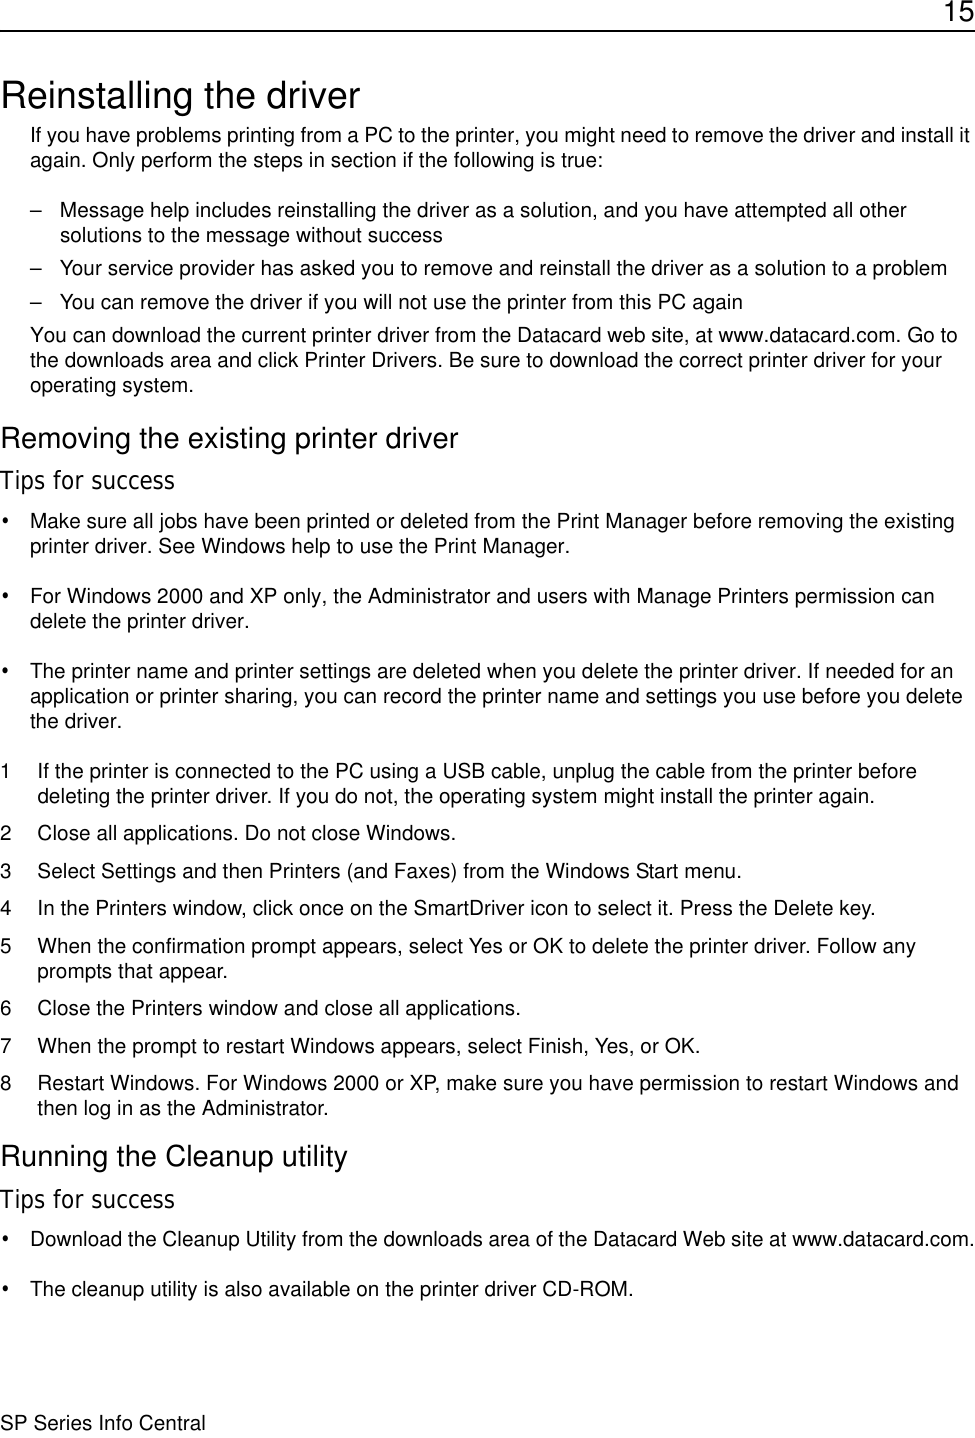 15SP Series Info CentralReinstalling the driverIf you have problems printing from a PC to the printer, you might need to remove the driver and install it again. Only perform the steps in section if the following is true:– Message help includes reinstalling the driver as a solution, and you have attempted all other solutions to the message without success– Your service provider has asked you to remove and reinstall the driver as a solution to a problem– You can remove the driver if you will not use the printer from this PC againYou can download the current printer driver from the Datacard web site, at www.datacard.com. Go to the downloads area and click Printer Drivers. Be sure to download the correct printer driver for your operating system. Removing the existing printer driverTips for success•Make sure all jobs have been printed or deleted from the Print Manager before removing the existing printer driver. See Windows help to use the Print Manager.•For Windows 2000 and XP only, the Administrator and users with Manage Printers permission can delete the printer driver.•The printer name and printer settings are deleted when you delete the printer driver. If needed for an application or printer sharing, you can record the printer name and settings you use before you delete the driver.1 If the printer is connected to the PC using a USB cable, unplug the cable from the printer before deleting the printer driver. If you do not, the operating system might install the printer again.2 Close all applications. Do not close Windows.3 Select Settings and then Printers (and Faxes) from the Windows Start menu.4 In the Printers window, click once on the SmartDriver icon to select it. Press the Delete key. 5 When the confirmation prompt appears, select Yes or OK to delete the printer driver. Follow any prompts that appear.6 Close the Printers window and close all applications.7 When the prompt to restart Windows appears, select Finish, Yes, or OK.8 Restart Windows. For Windows 2000 or XP, make sure you have permission to restart Windows and then log in as the Administrator.Running the Cleanup utilityTips for success•Download the Cleanup Utility from the downloads area of the Datacard Web site at www.datacard.com.•The cleanup utility is also available on the printer driver CD-ROM. 